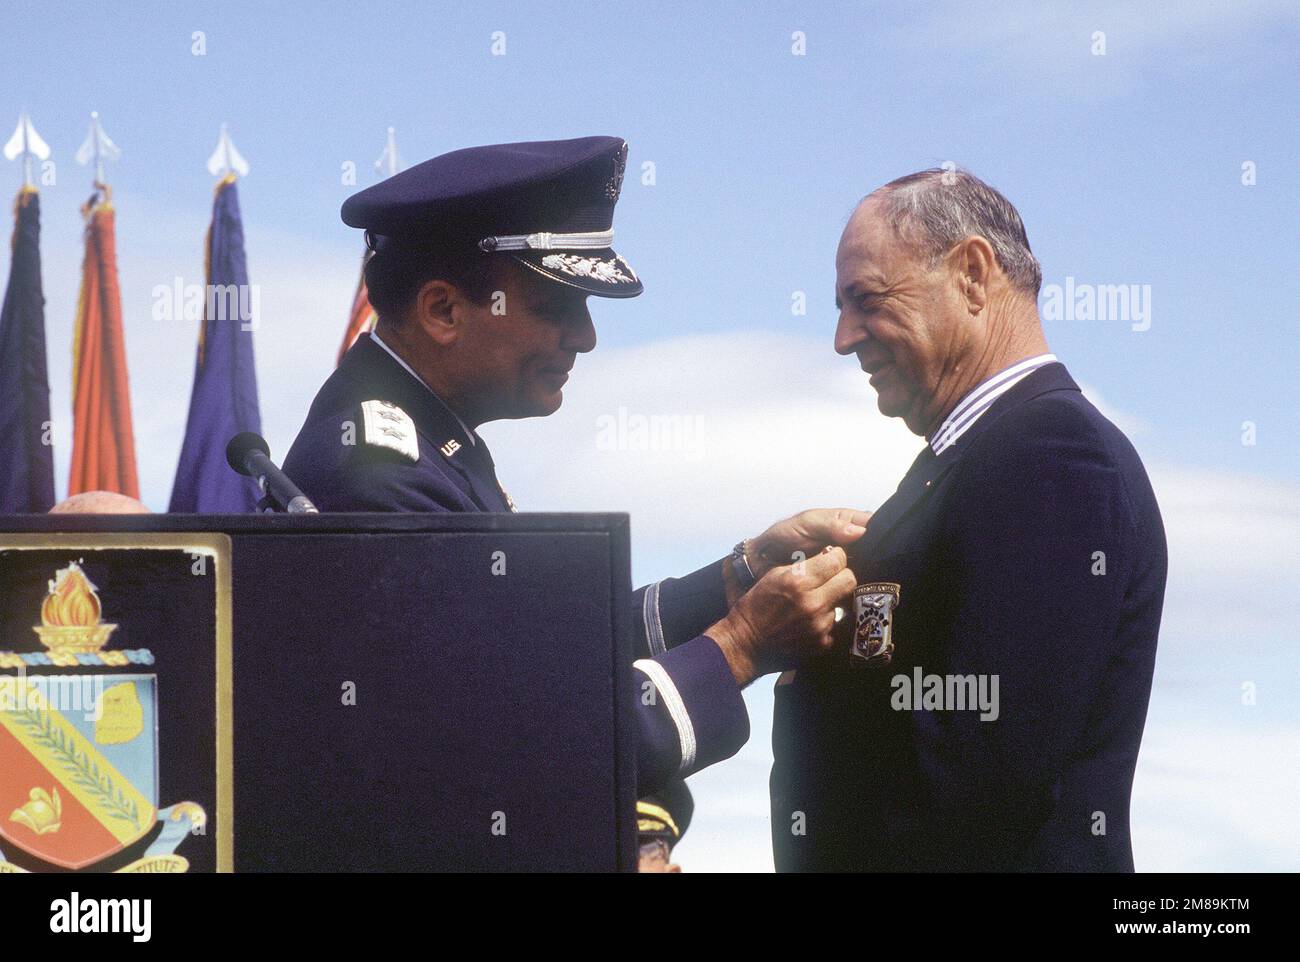 Robert L. Hite, one of Doolittle's Raiders, receives his POW/MIA medal for service in World War II from Major General Alexander K. Davidson, commander, 22nd Air Force, Military Airlift Command. Base: Nav Post Grad School, Monterey State: California (CA) Country: United States Of America (USA) Stock Photo